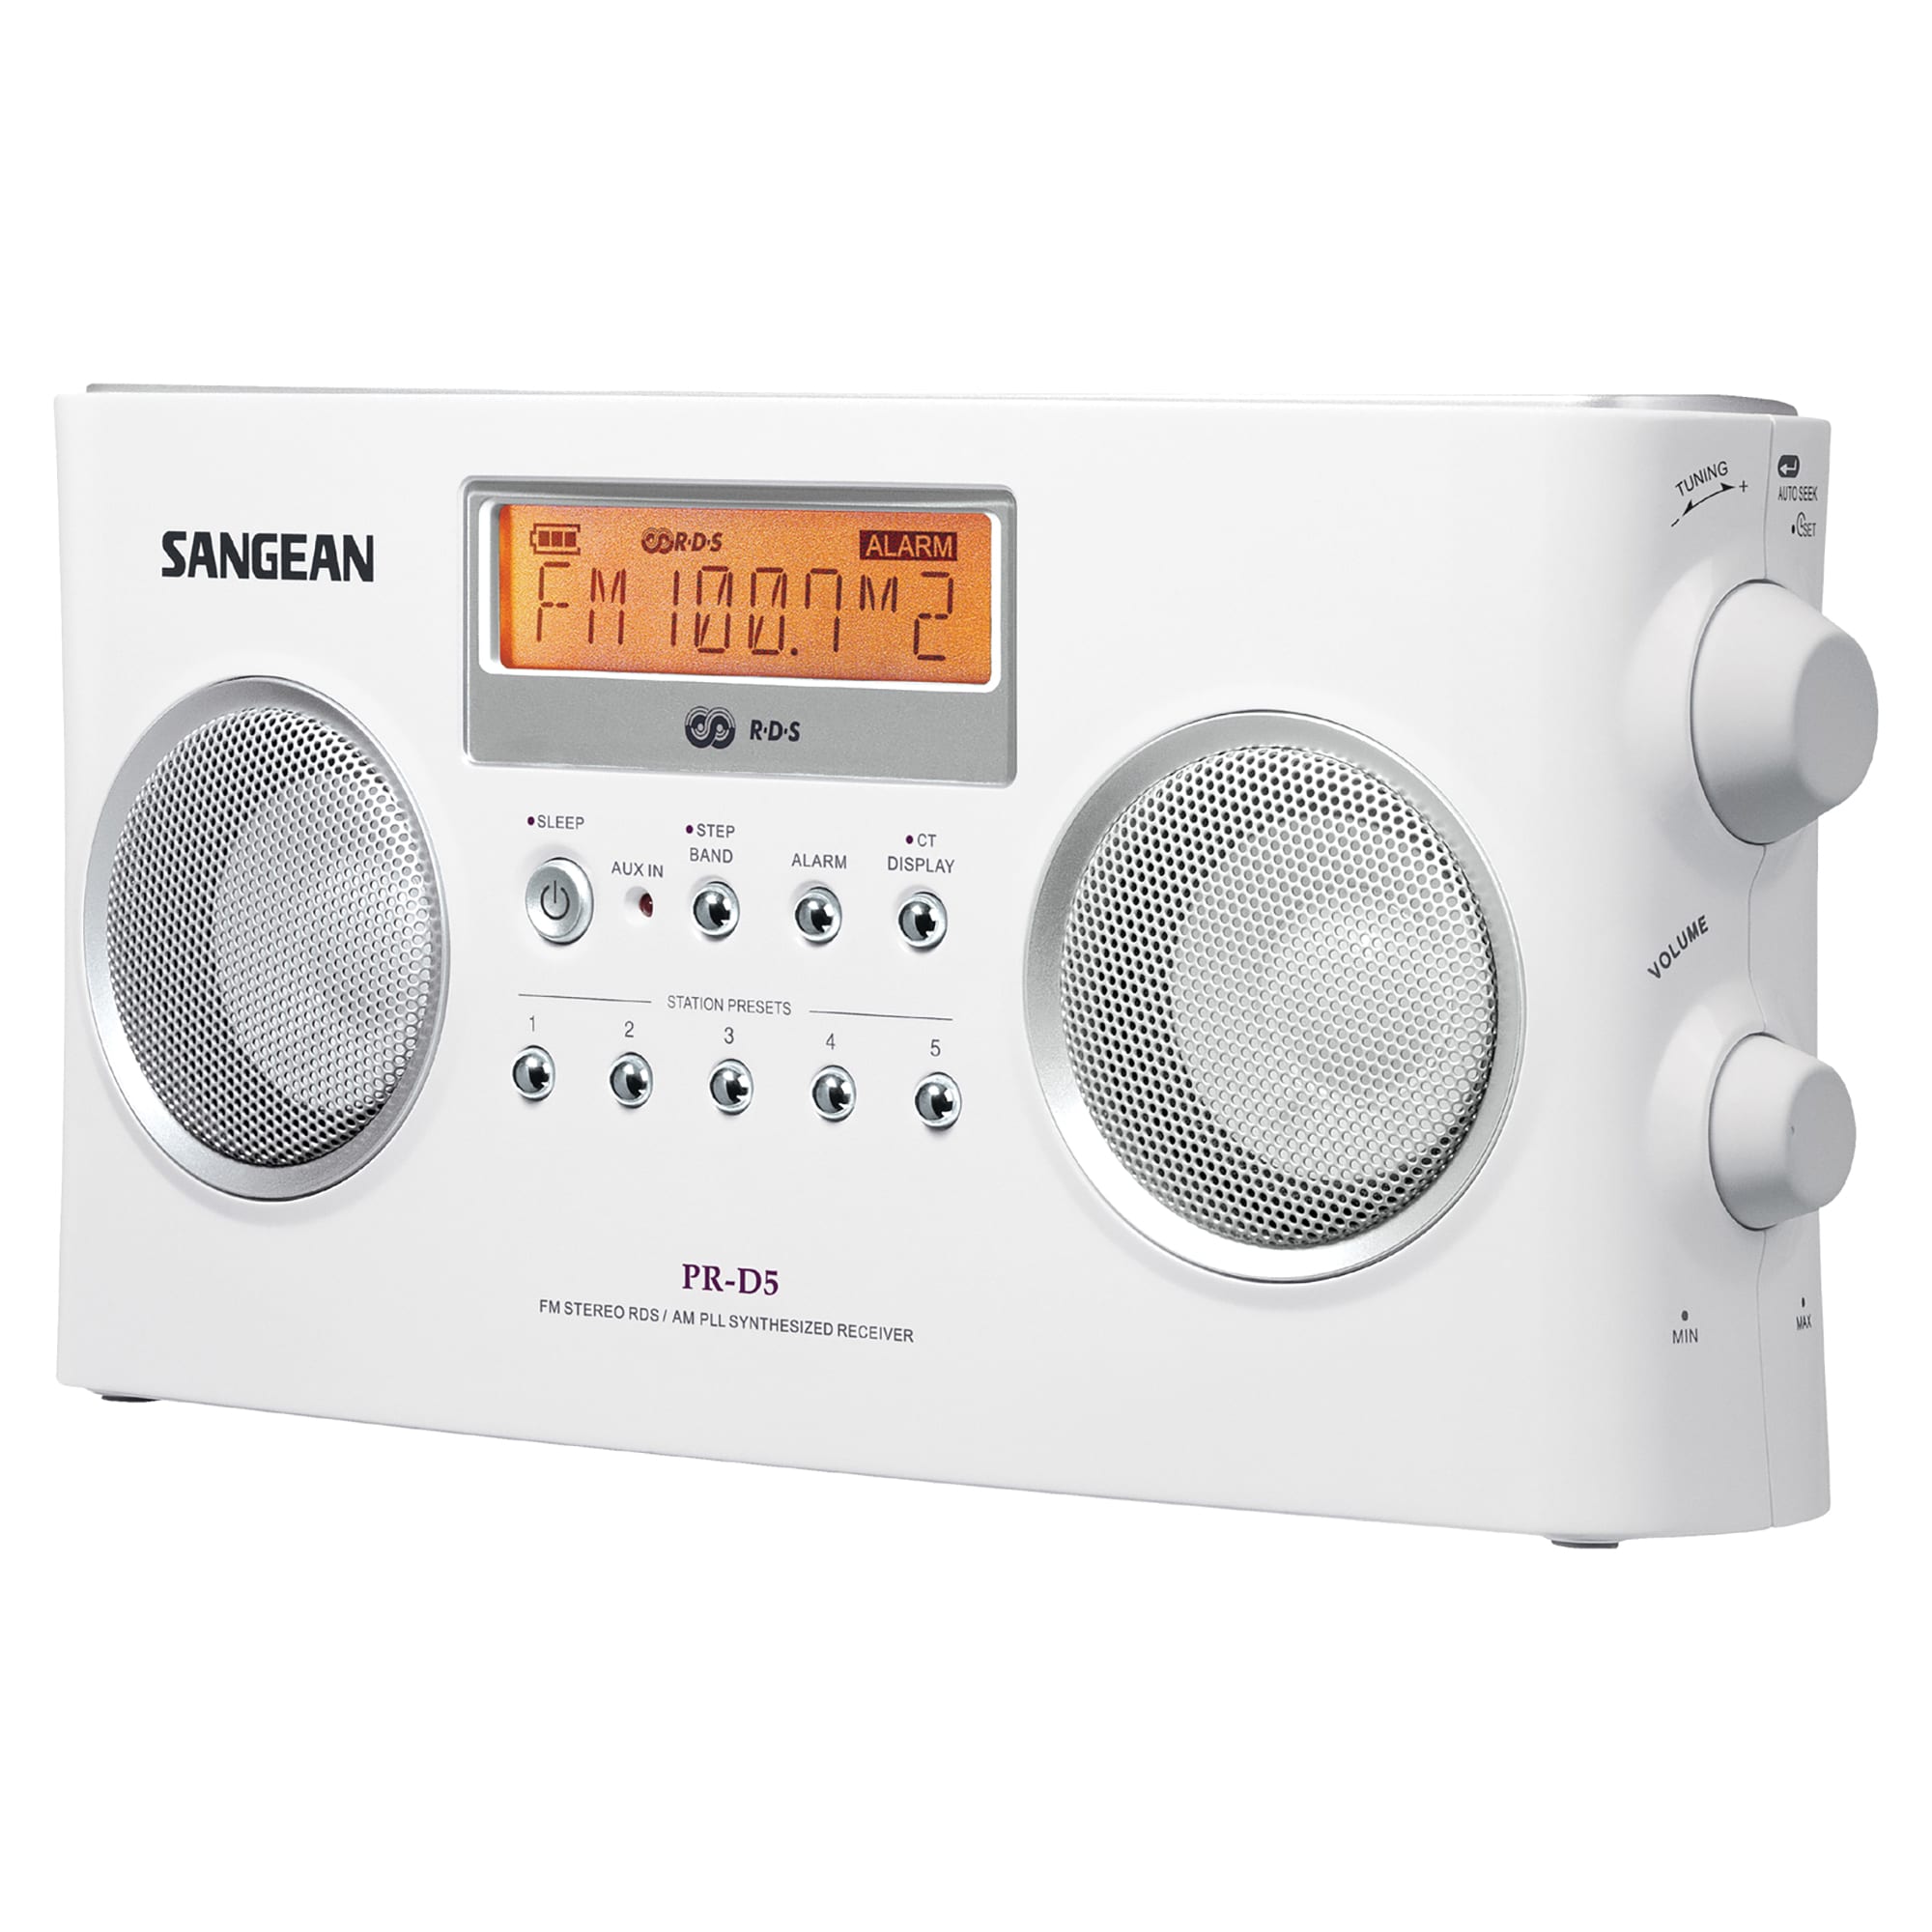 Sangean White Digital Portable Stereo Receiver with AM/FM Radio - Cordless,  Alarm, Battery/AC Power, Headphone Jack, Built-In Speakers - Sangean  Compatible in the Boomboxes & Radios department at